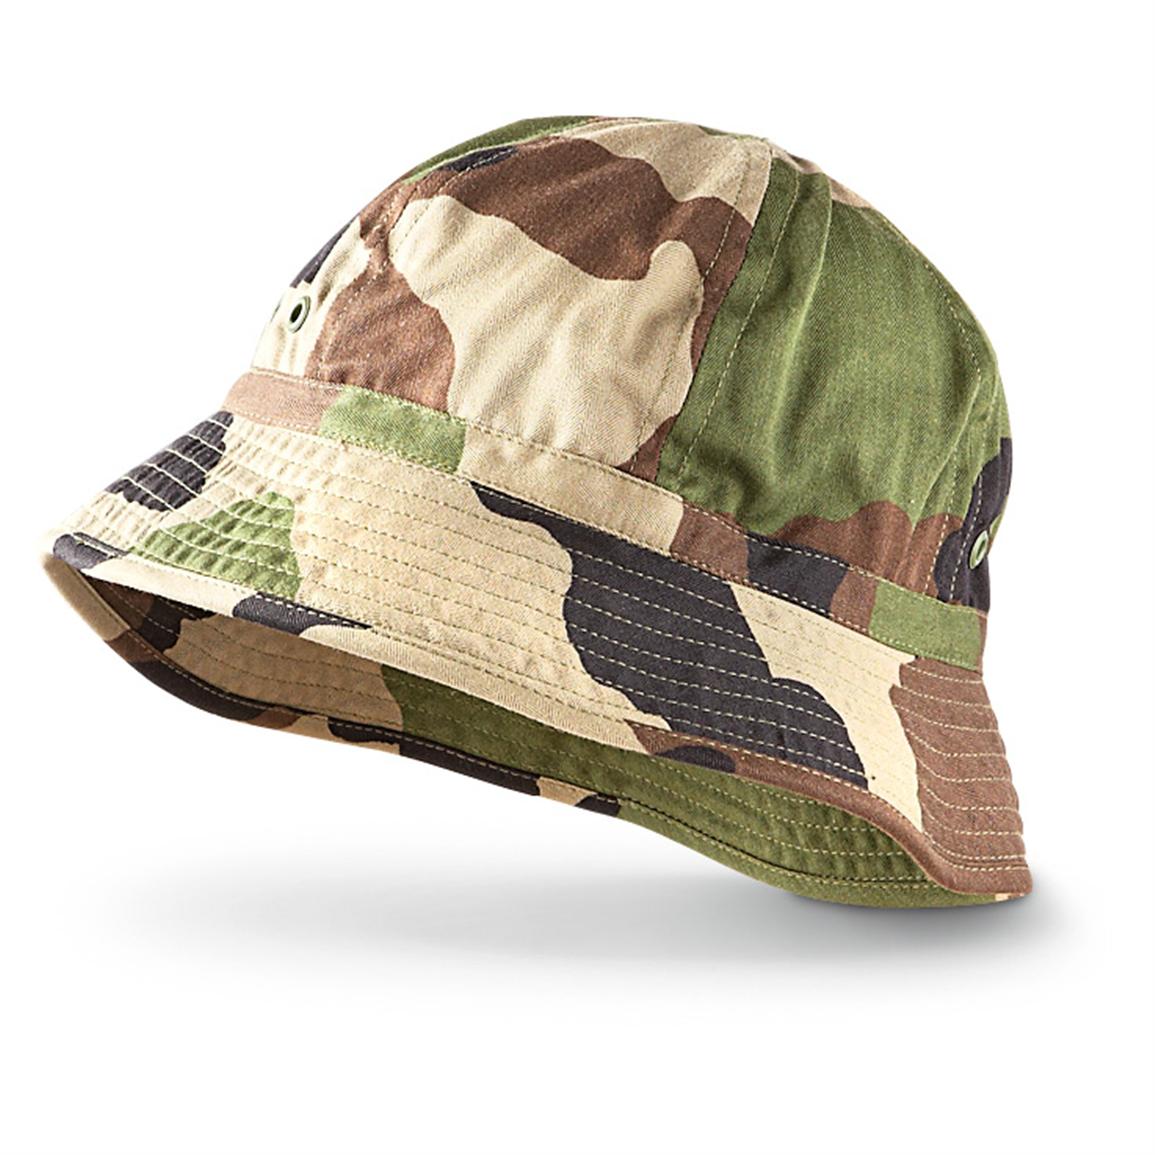 3 New French Military Boonie Hats - 233314, Hats & Caps at Sportsman's Guide